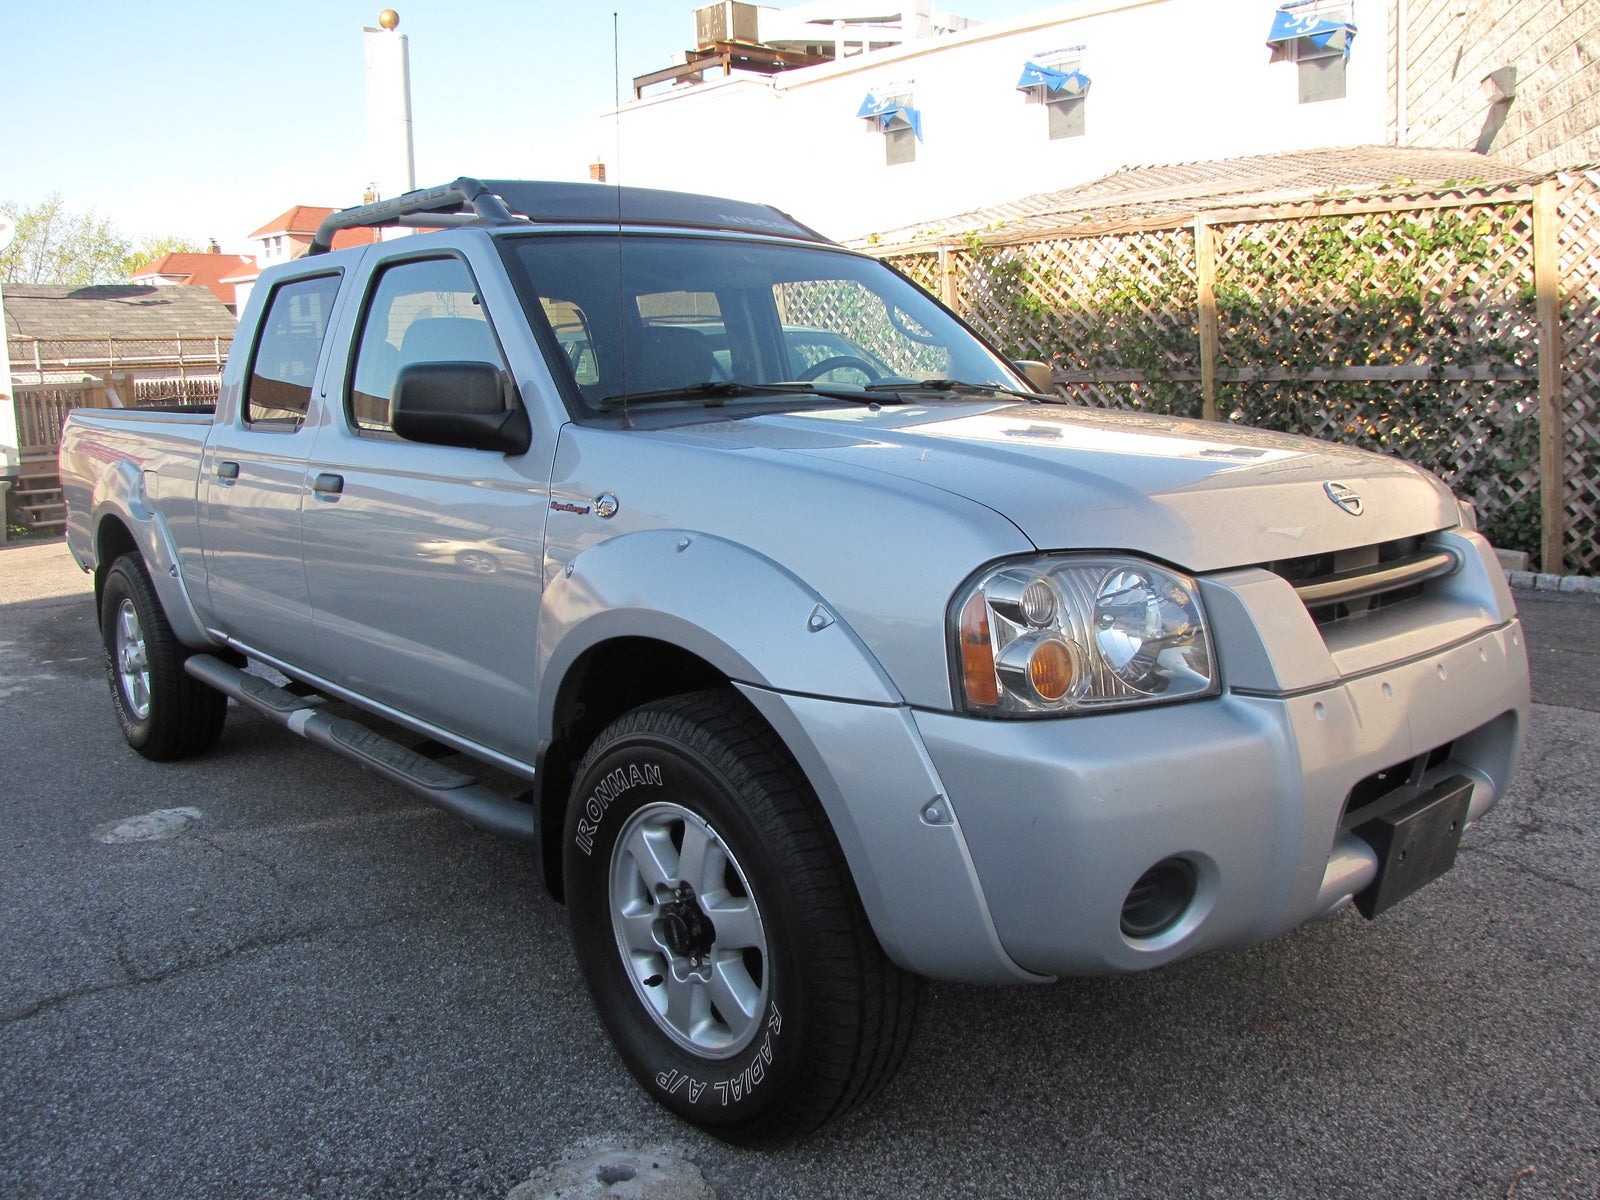 2003 Nissan frontier specs supercharged 2003 Nissan Frontier V6 Towing Capacity